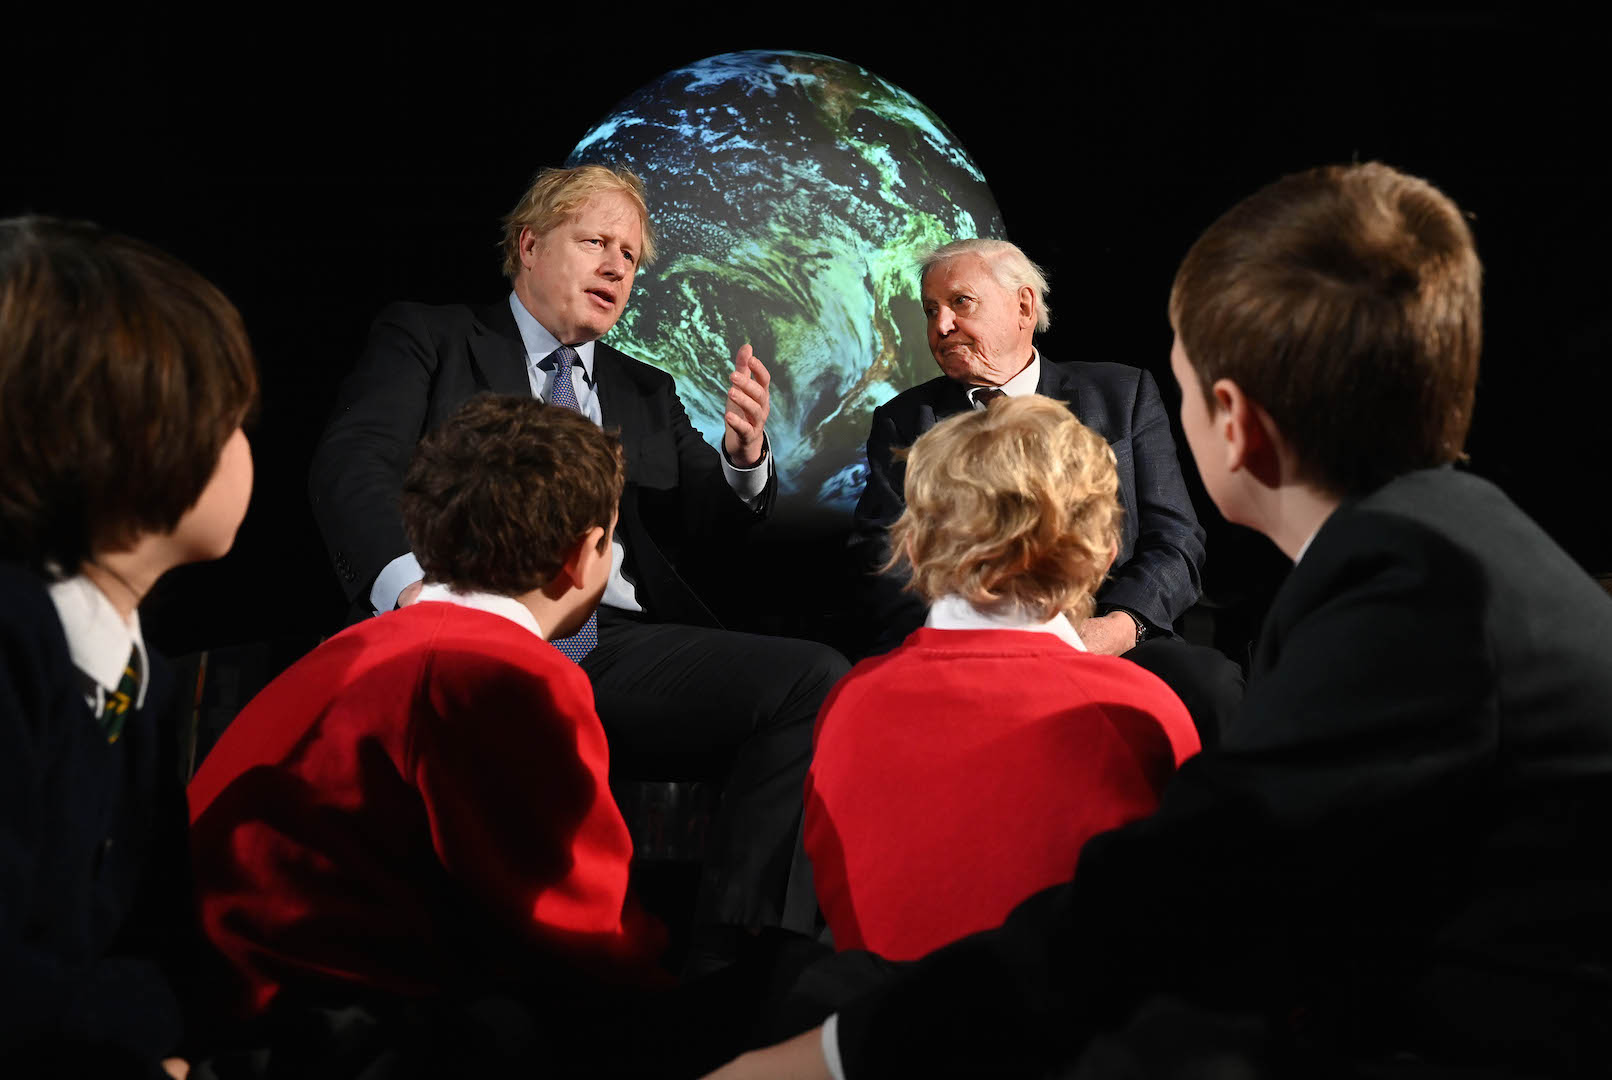 <p>UK Prime Minister Boris Johnson and naturalist Sir David Attenborough at the launch of COP26 climate change talks, which are in jeopardy due to coronavirus (image: <a href="https://www.flickr.com/photos/number10gov/49487770707/in/photostream/">Andrew Parsons / No10 Downing Street</a>)</p>